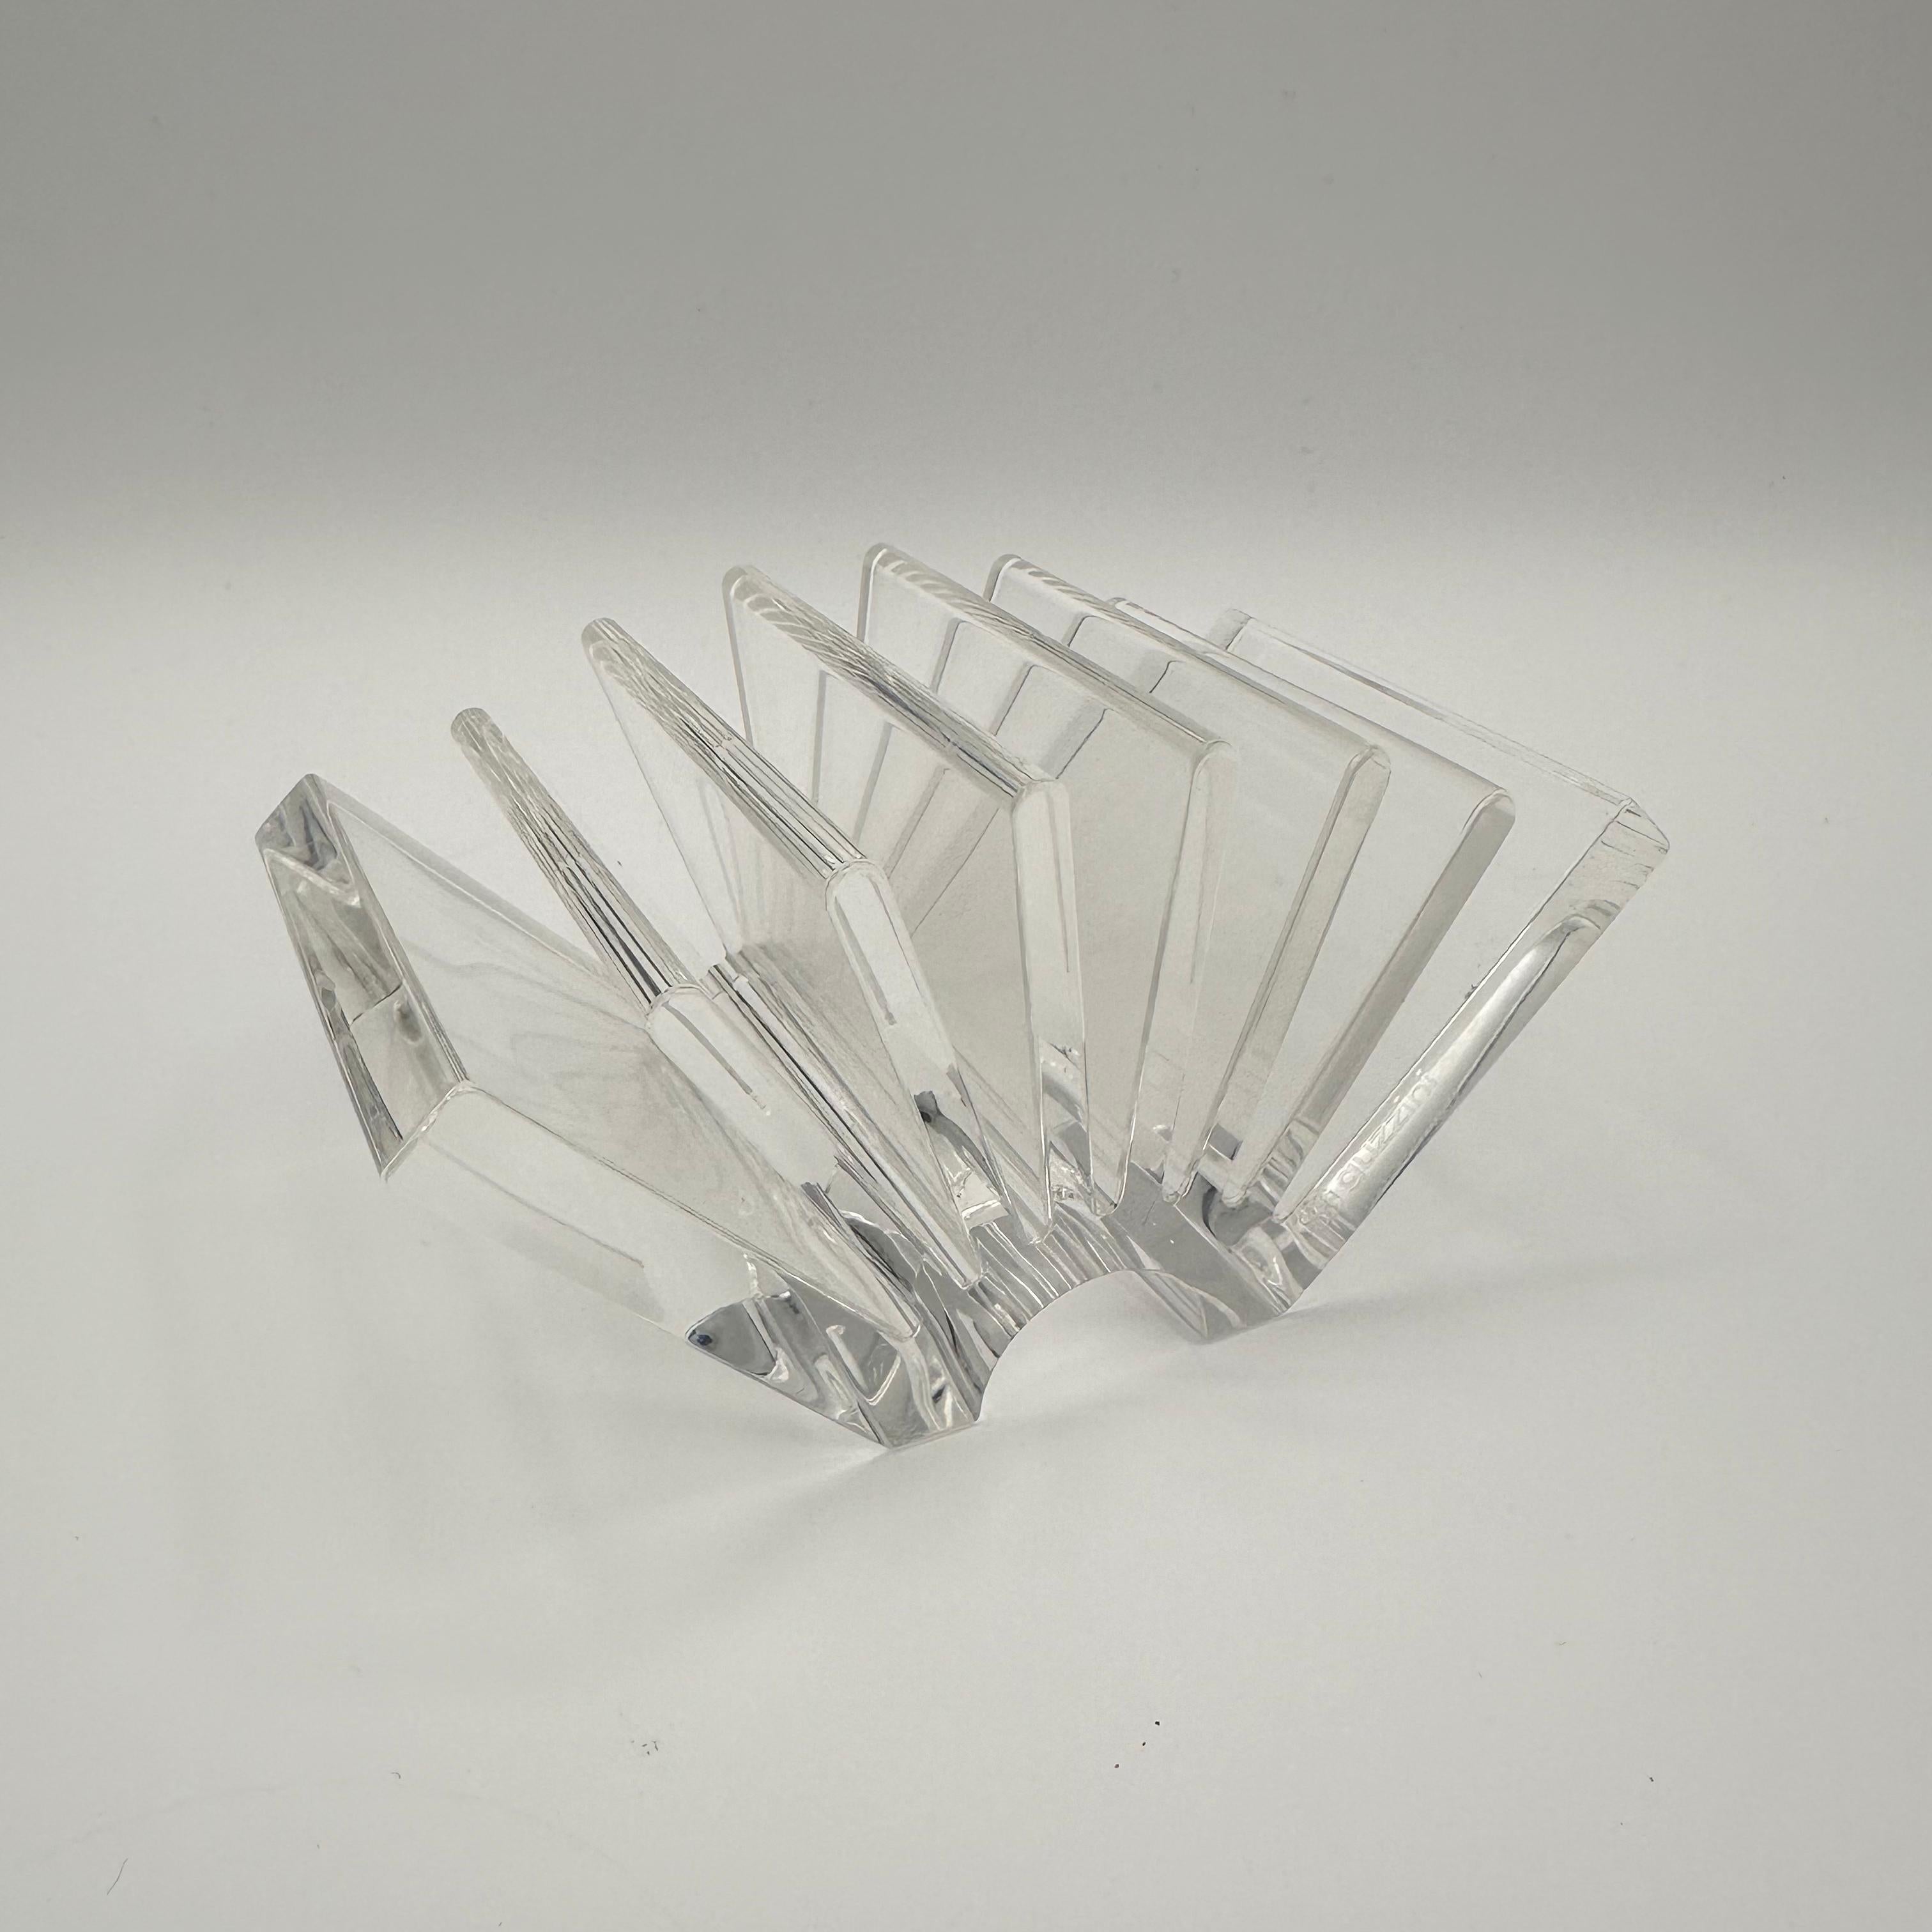 Vintage clear lucite or acrylic post modern fan shaped card holder, sorter or separator made in Italy in the 1980s by Guzzini. Marked 